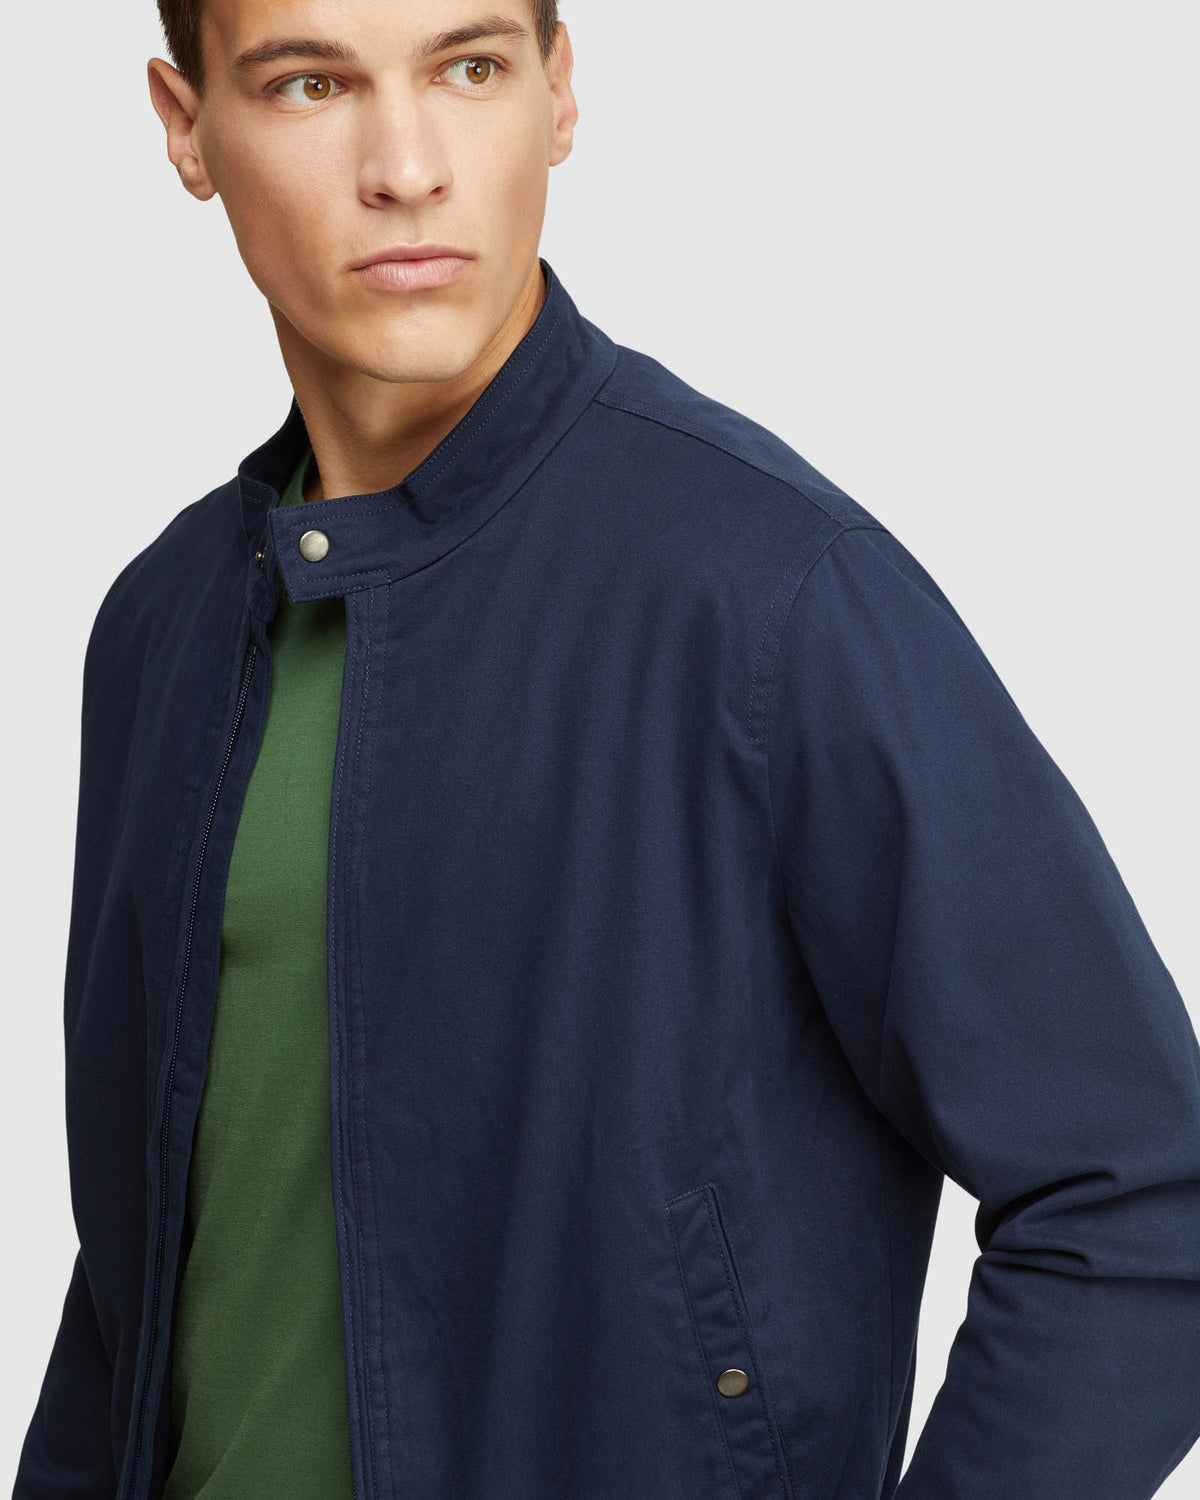 GEORGE COTTON BOMBER JACKET MENS JACKETS AND COATS